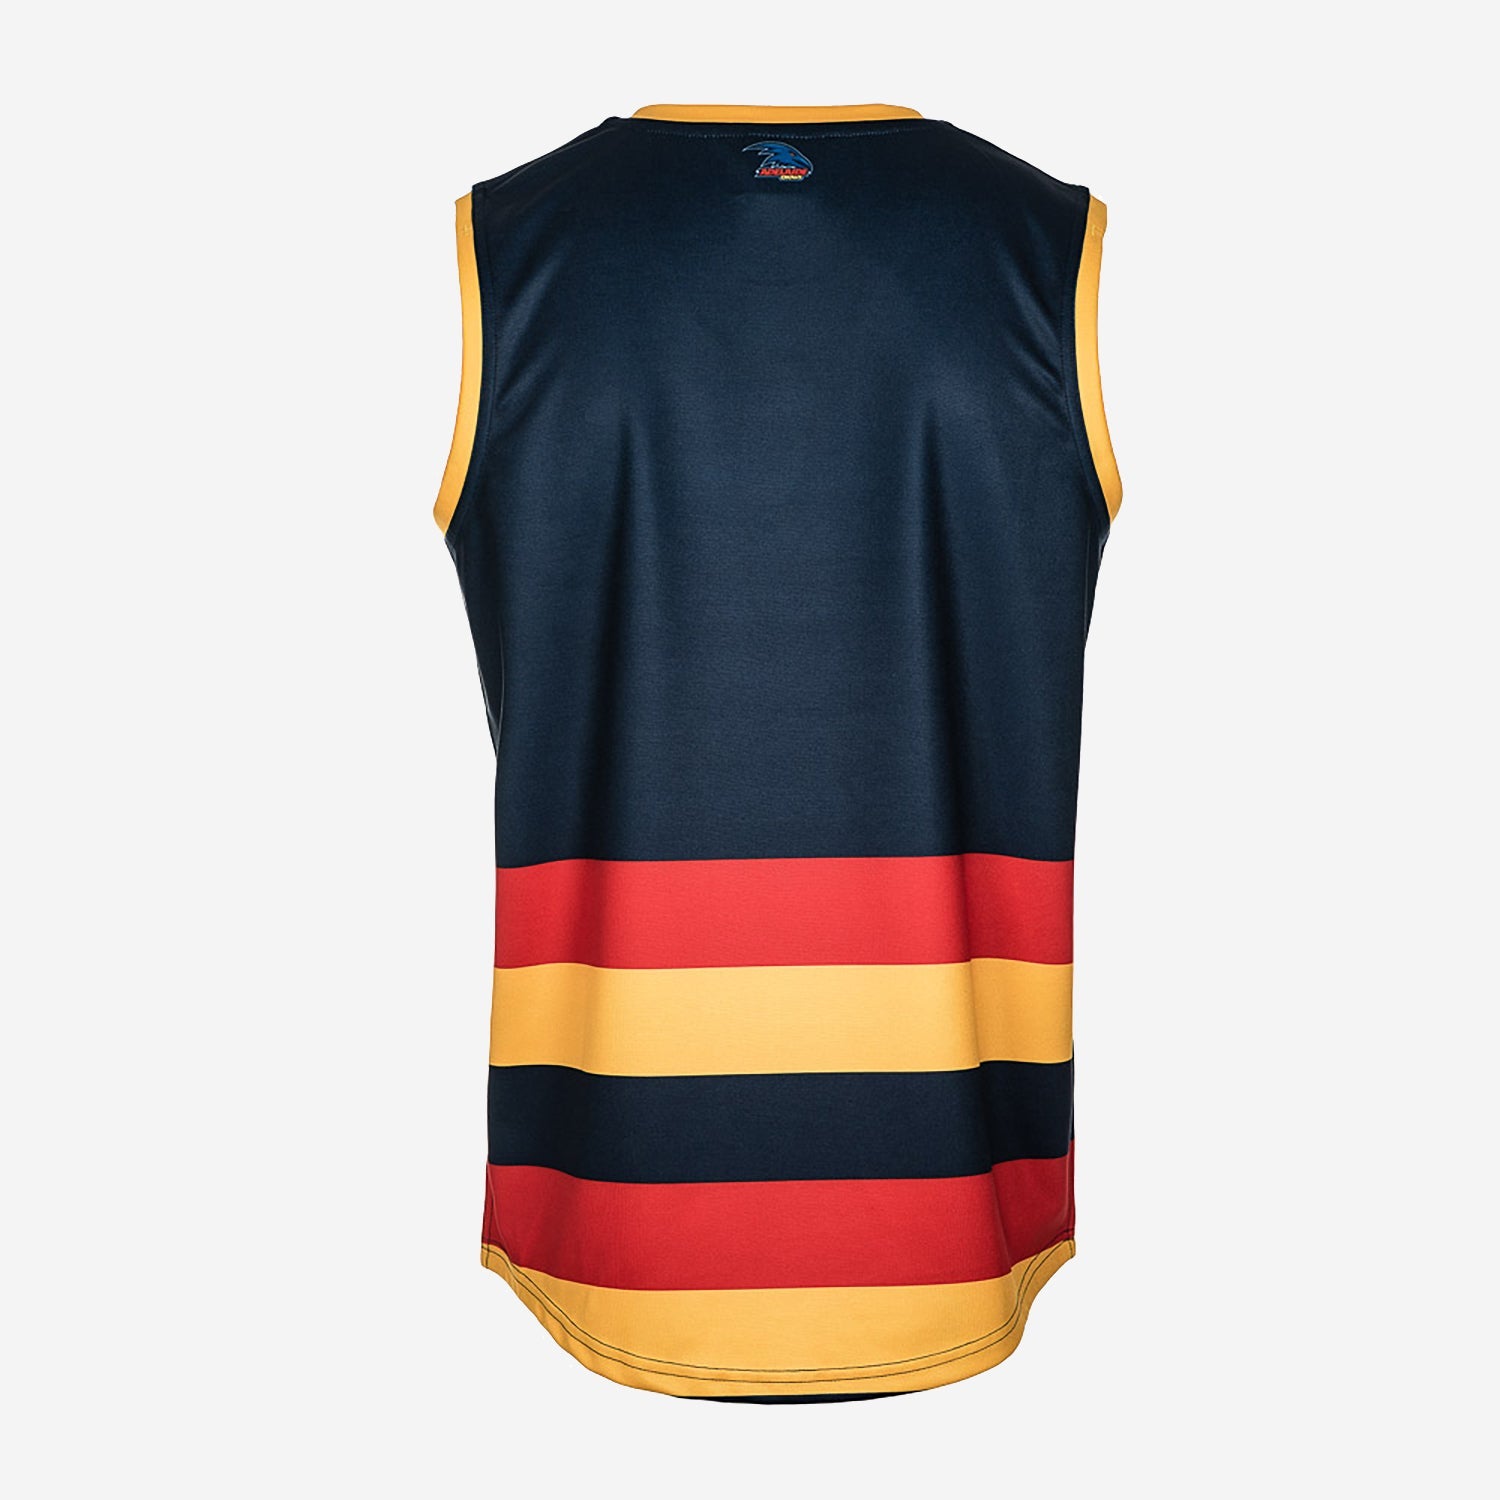 Adelaide Crows - AFL Replica Youth Guernsey